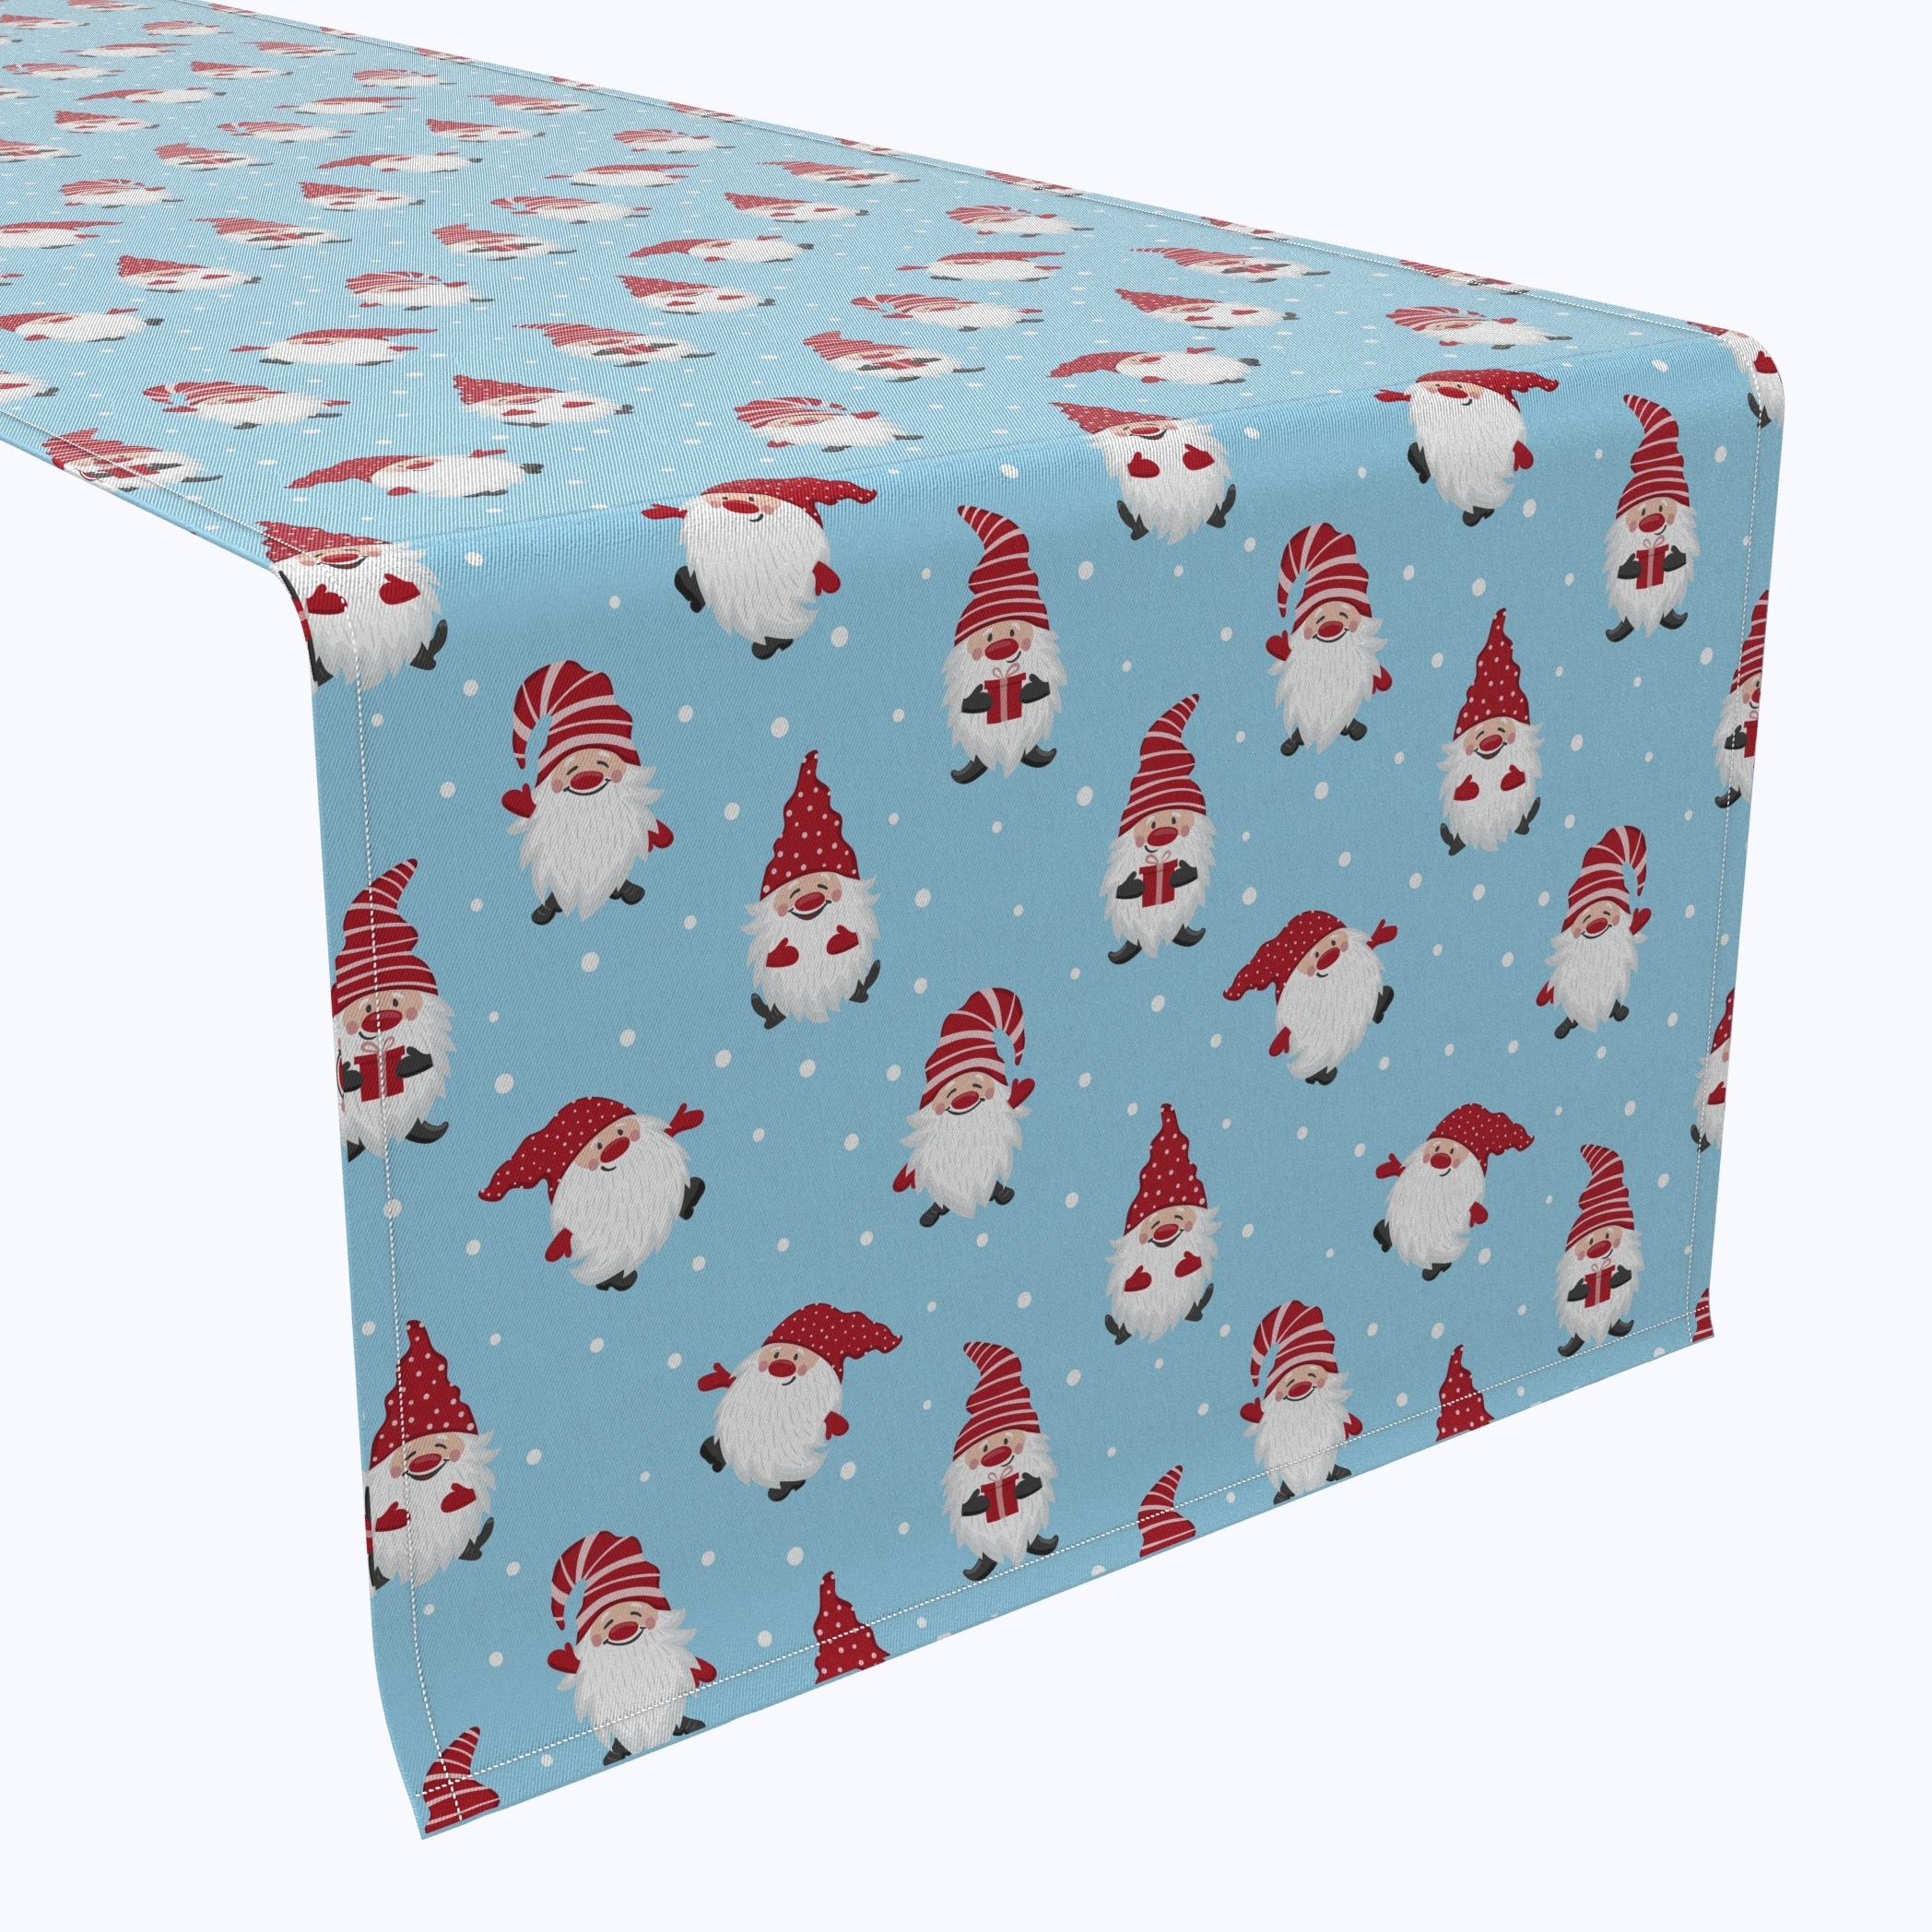 Fabric Textile Products, Inc. Table Runner, 100% Cotton, 16x108", Holiday Gnomes